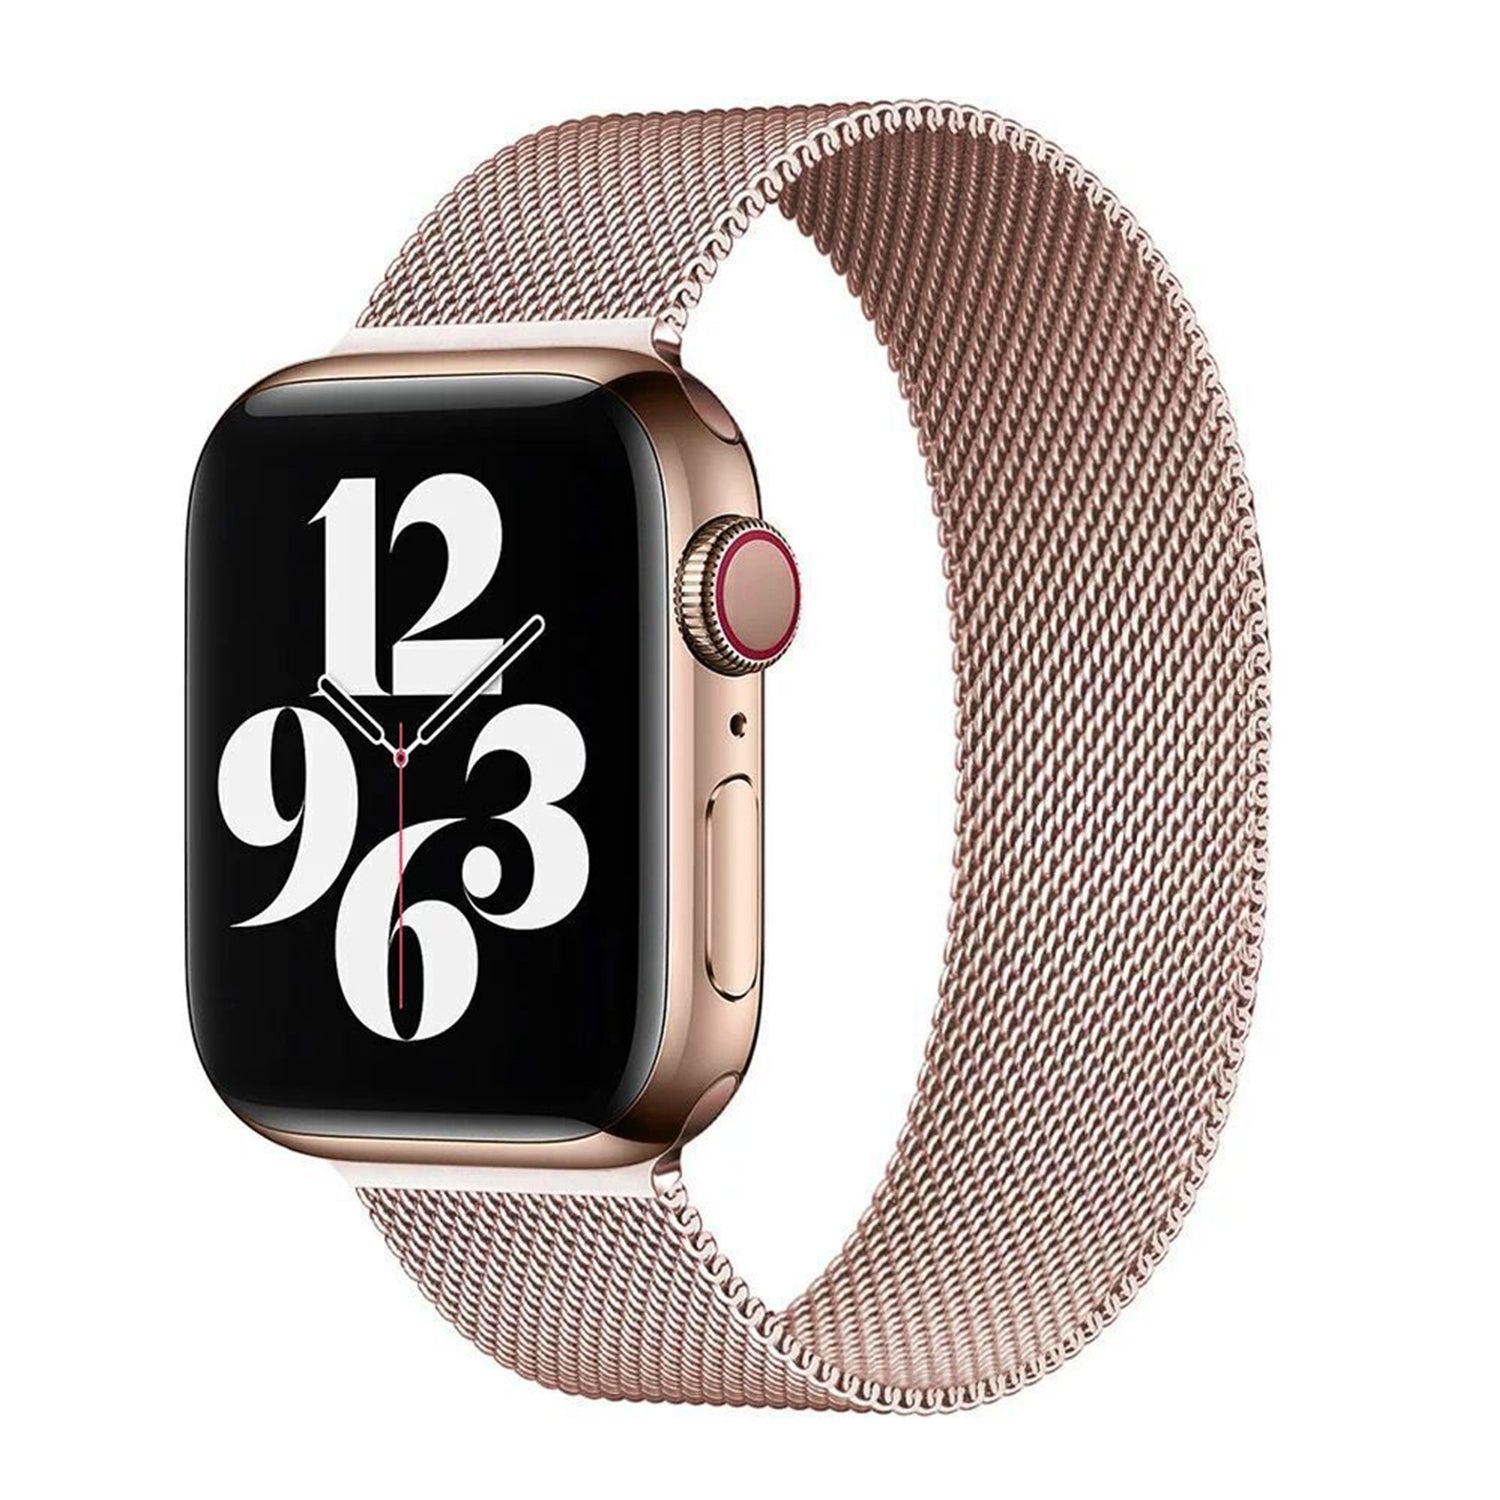 38mm Stainless Steel Wristband  for i-Watch Series 4/3/2/1  Milanese Loop with Strong Magnetic Closure Strap